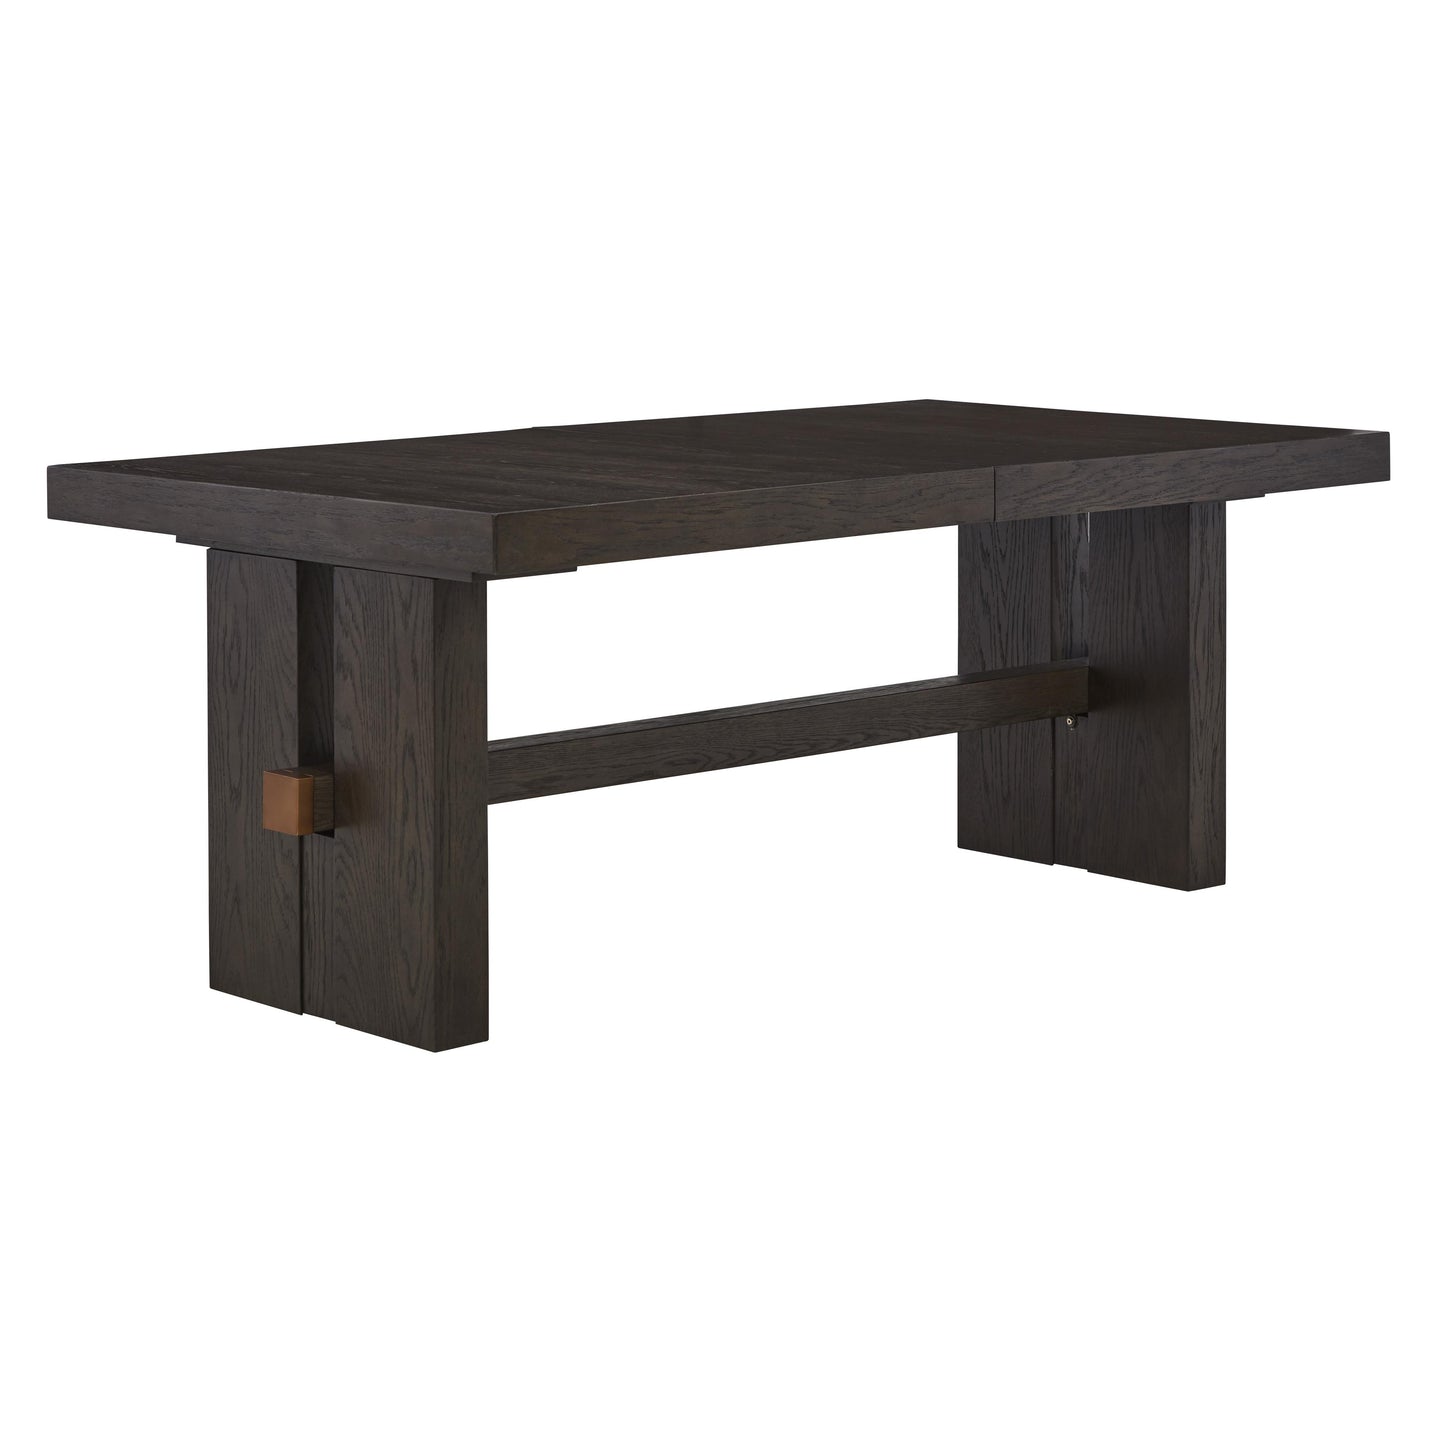 Signature Design by Ashley Burkhaus Dining Table with Trestle Base D984-45